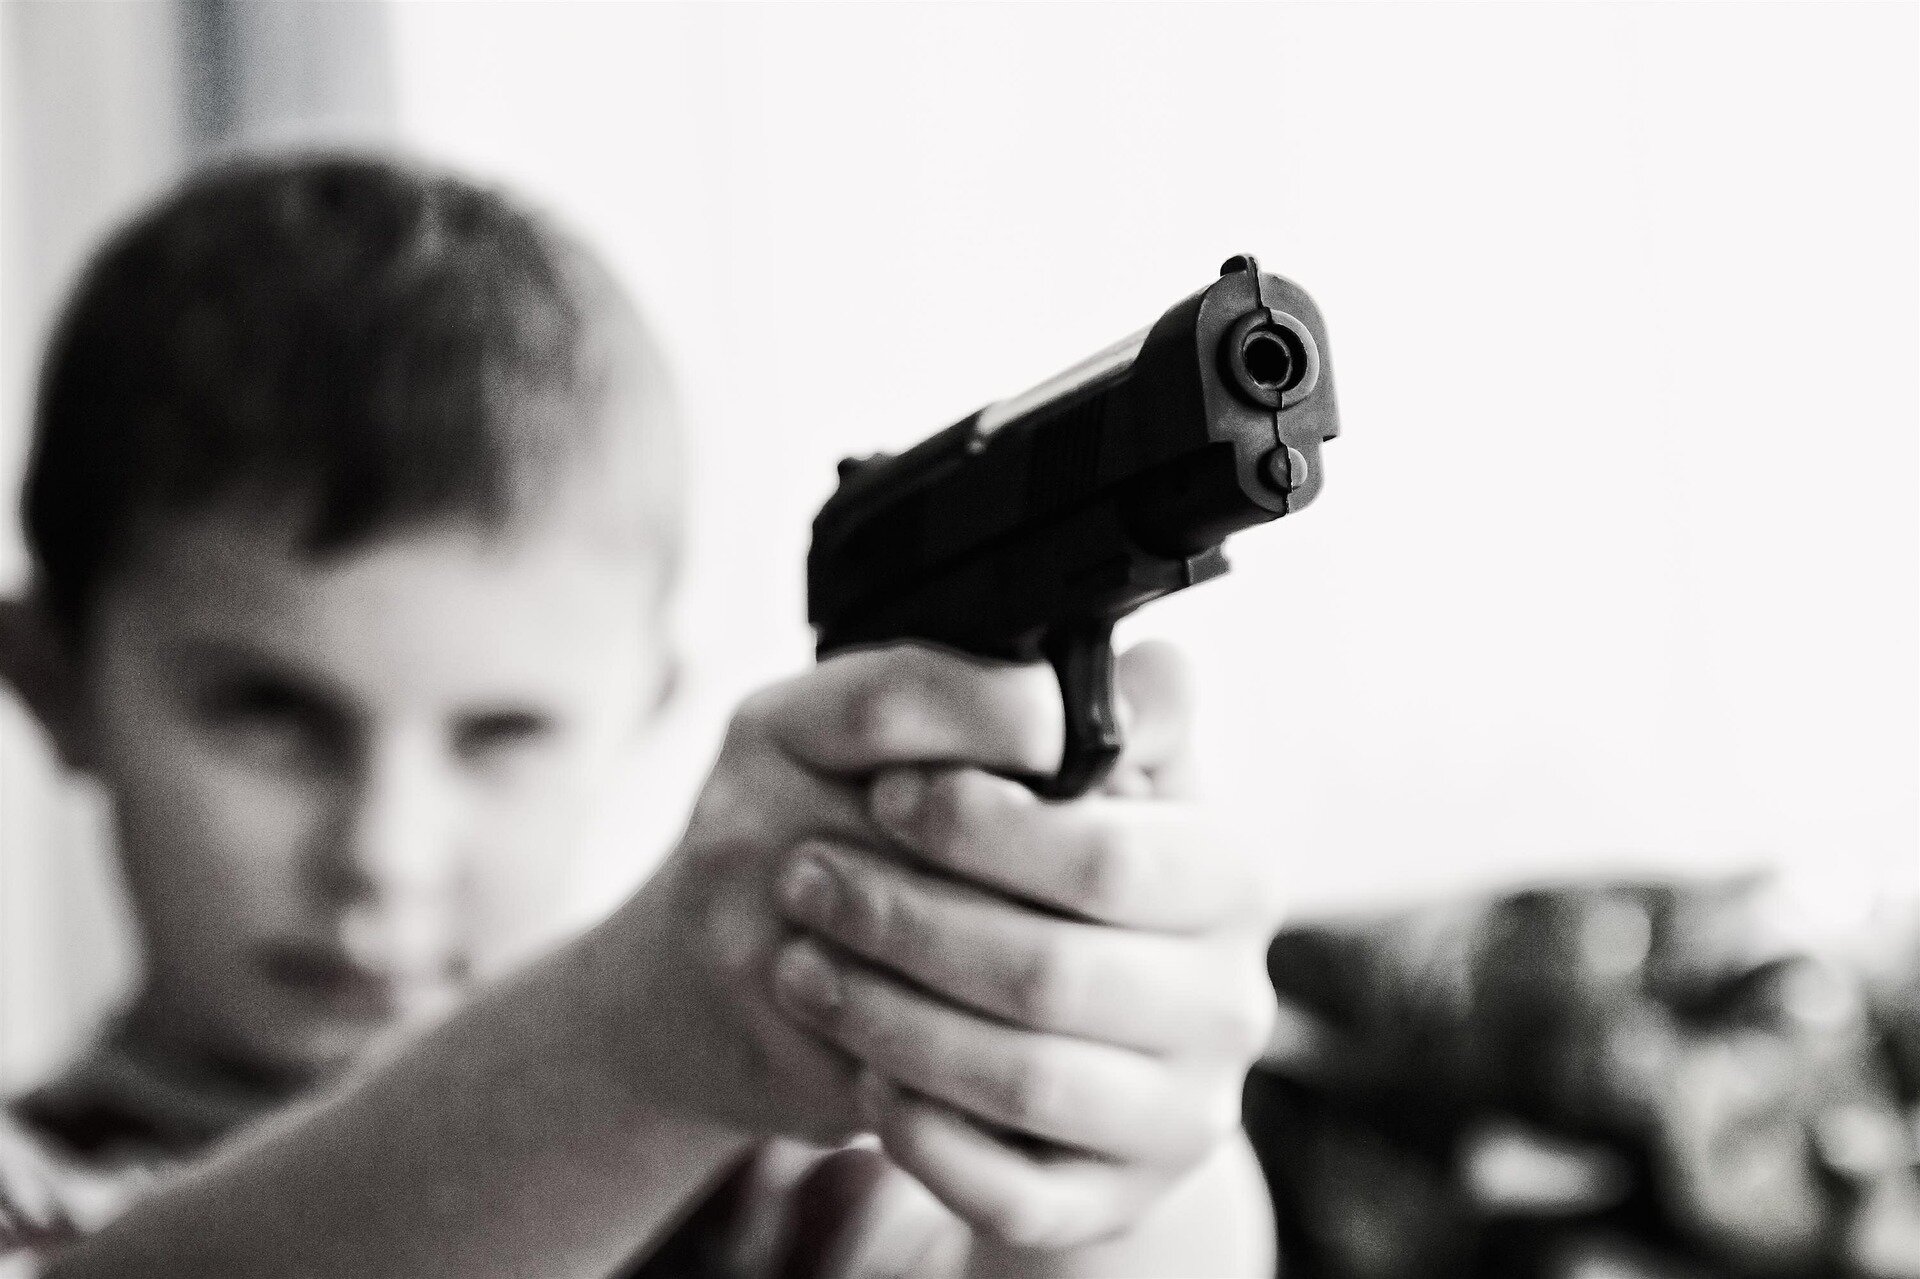 #Firearms now the top cause of death among children and adolescents, data analysis shows